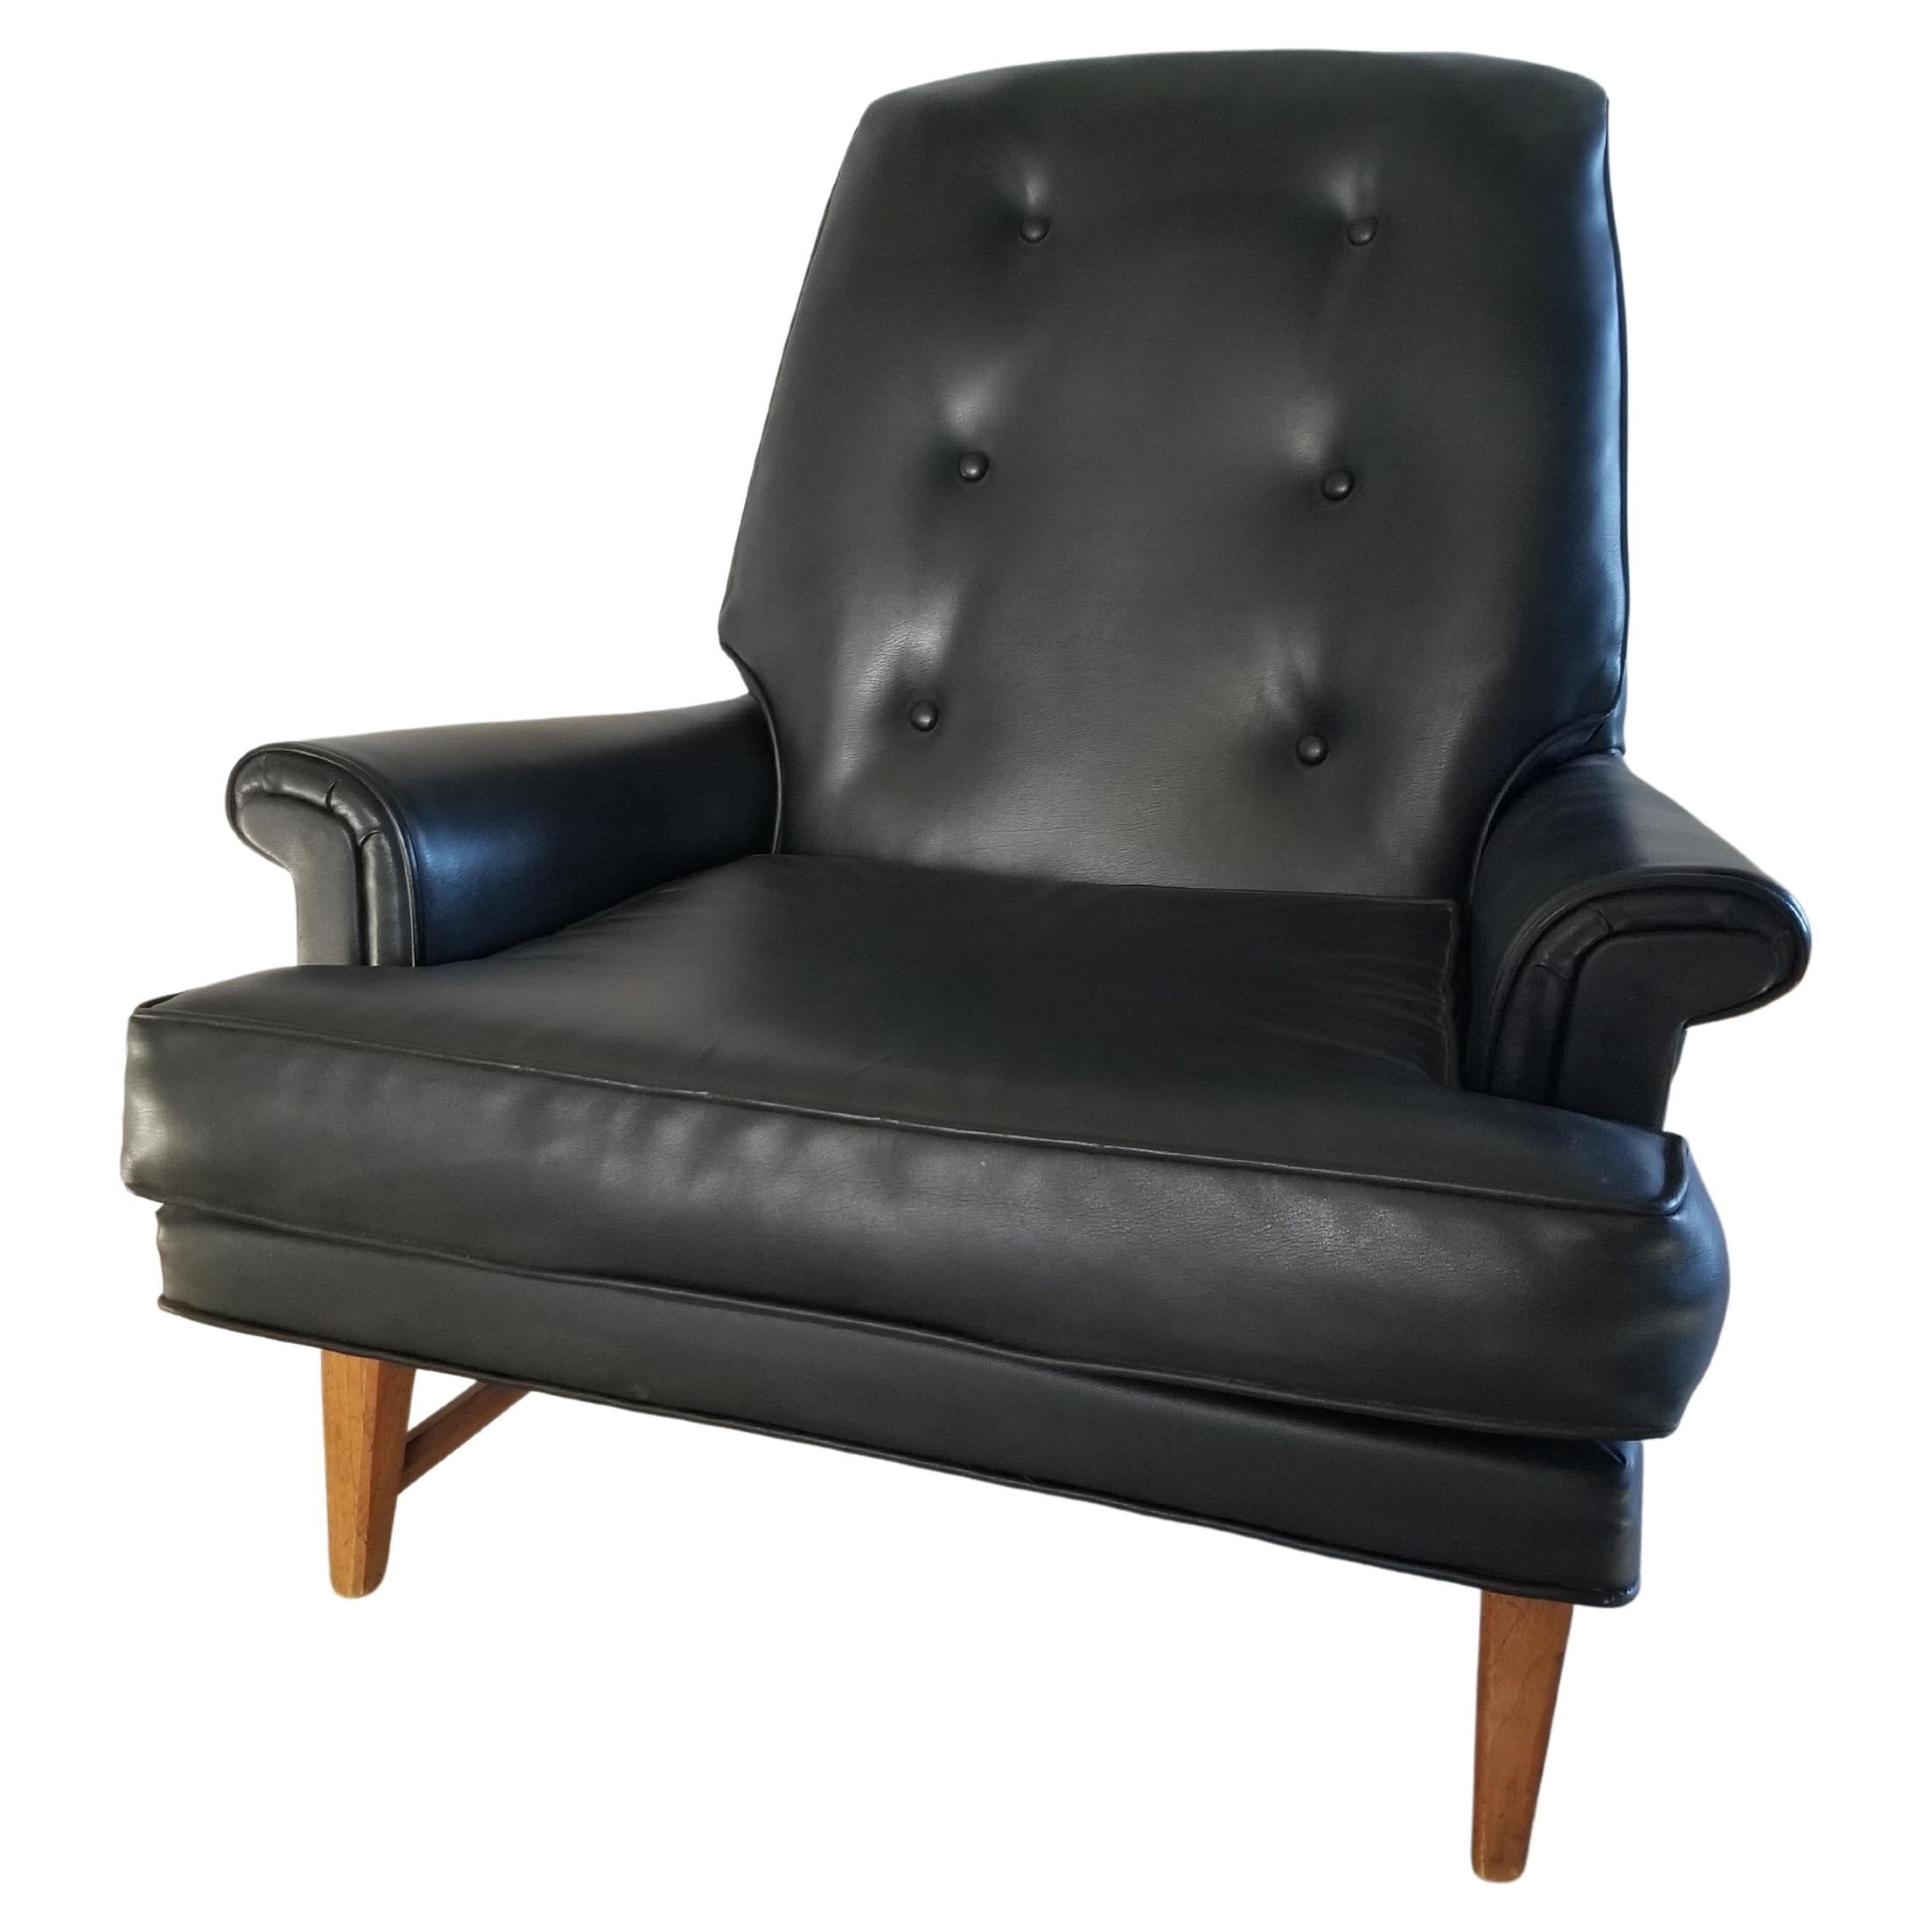 1950s Heritage Wormley Dunbar Black Faux Leather Mahogany Lounge Chair For Sale